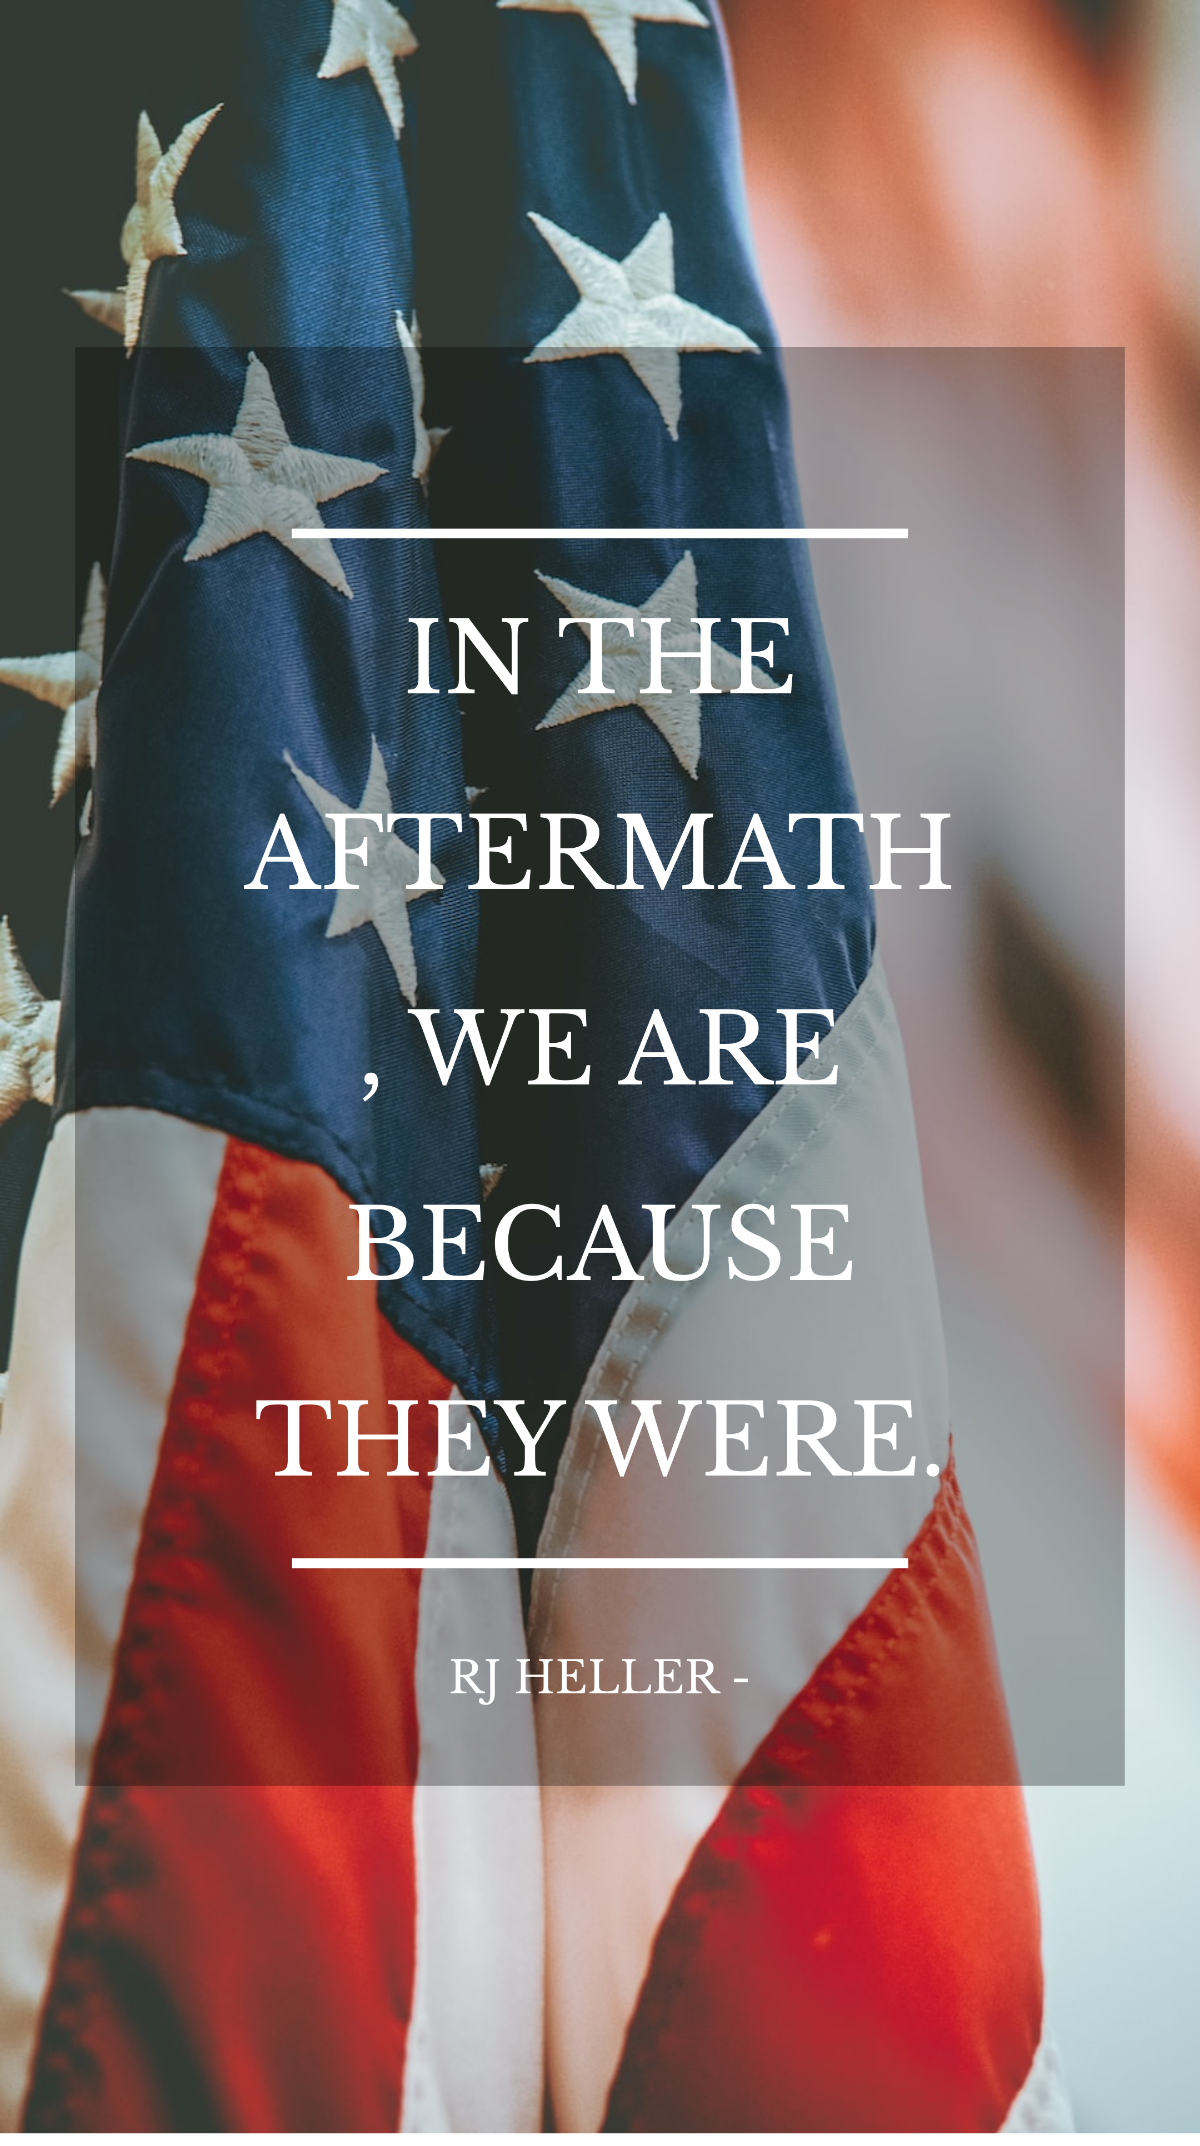 RJ Heller - In the aftermath, we are because they were. Template